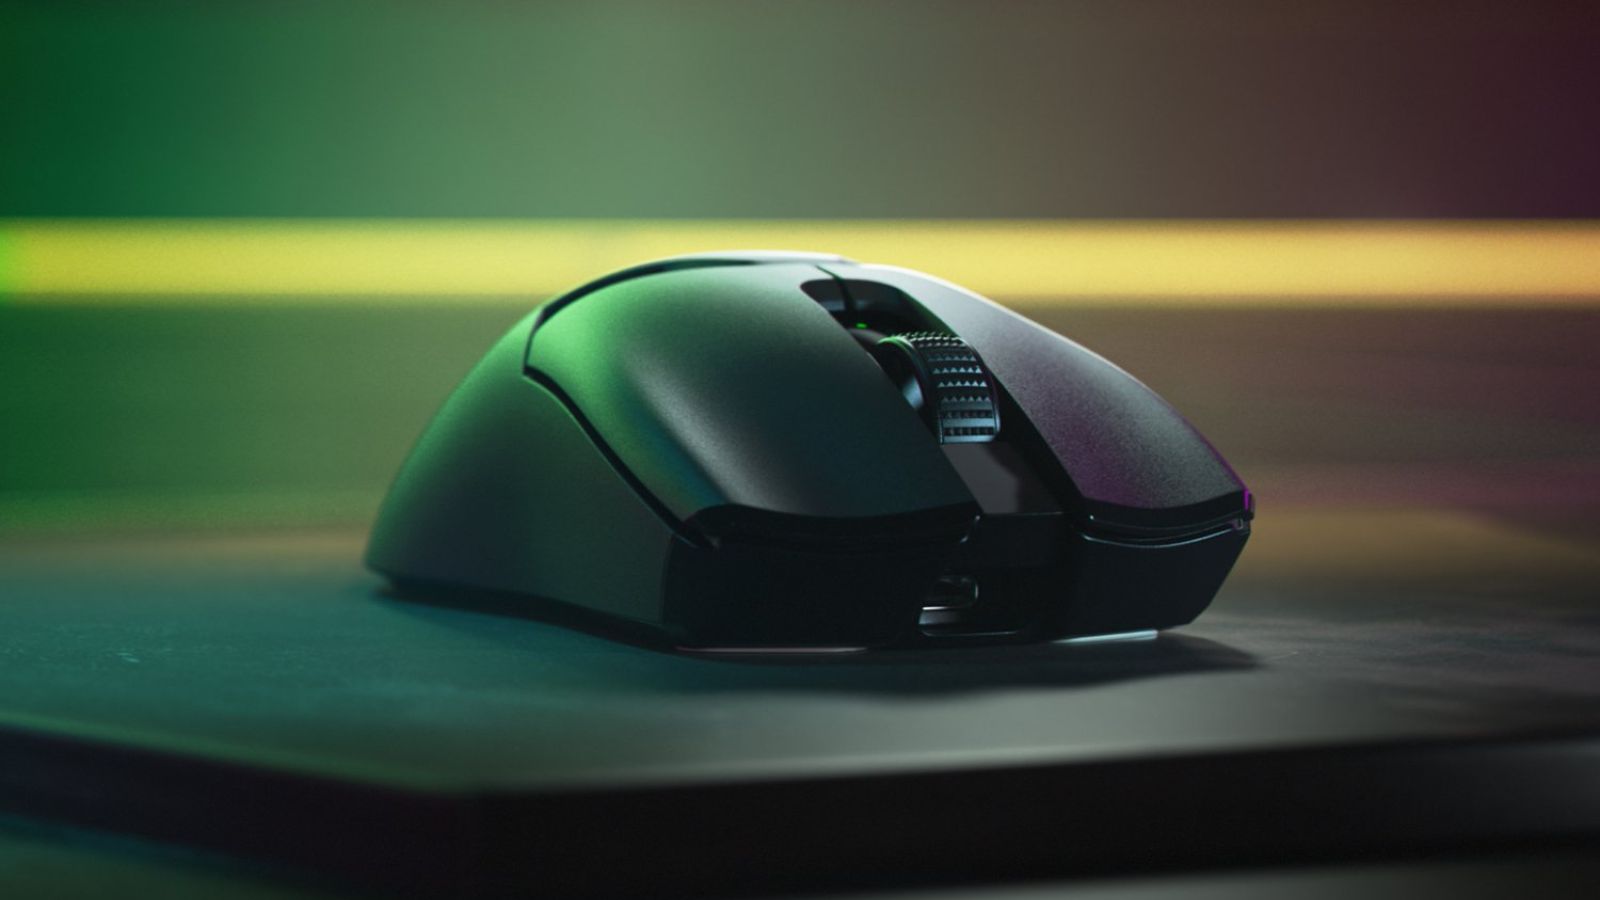 cool wireless gaming mouse